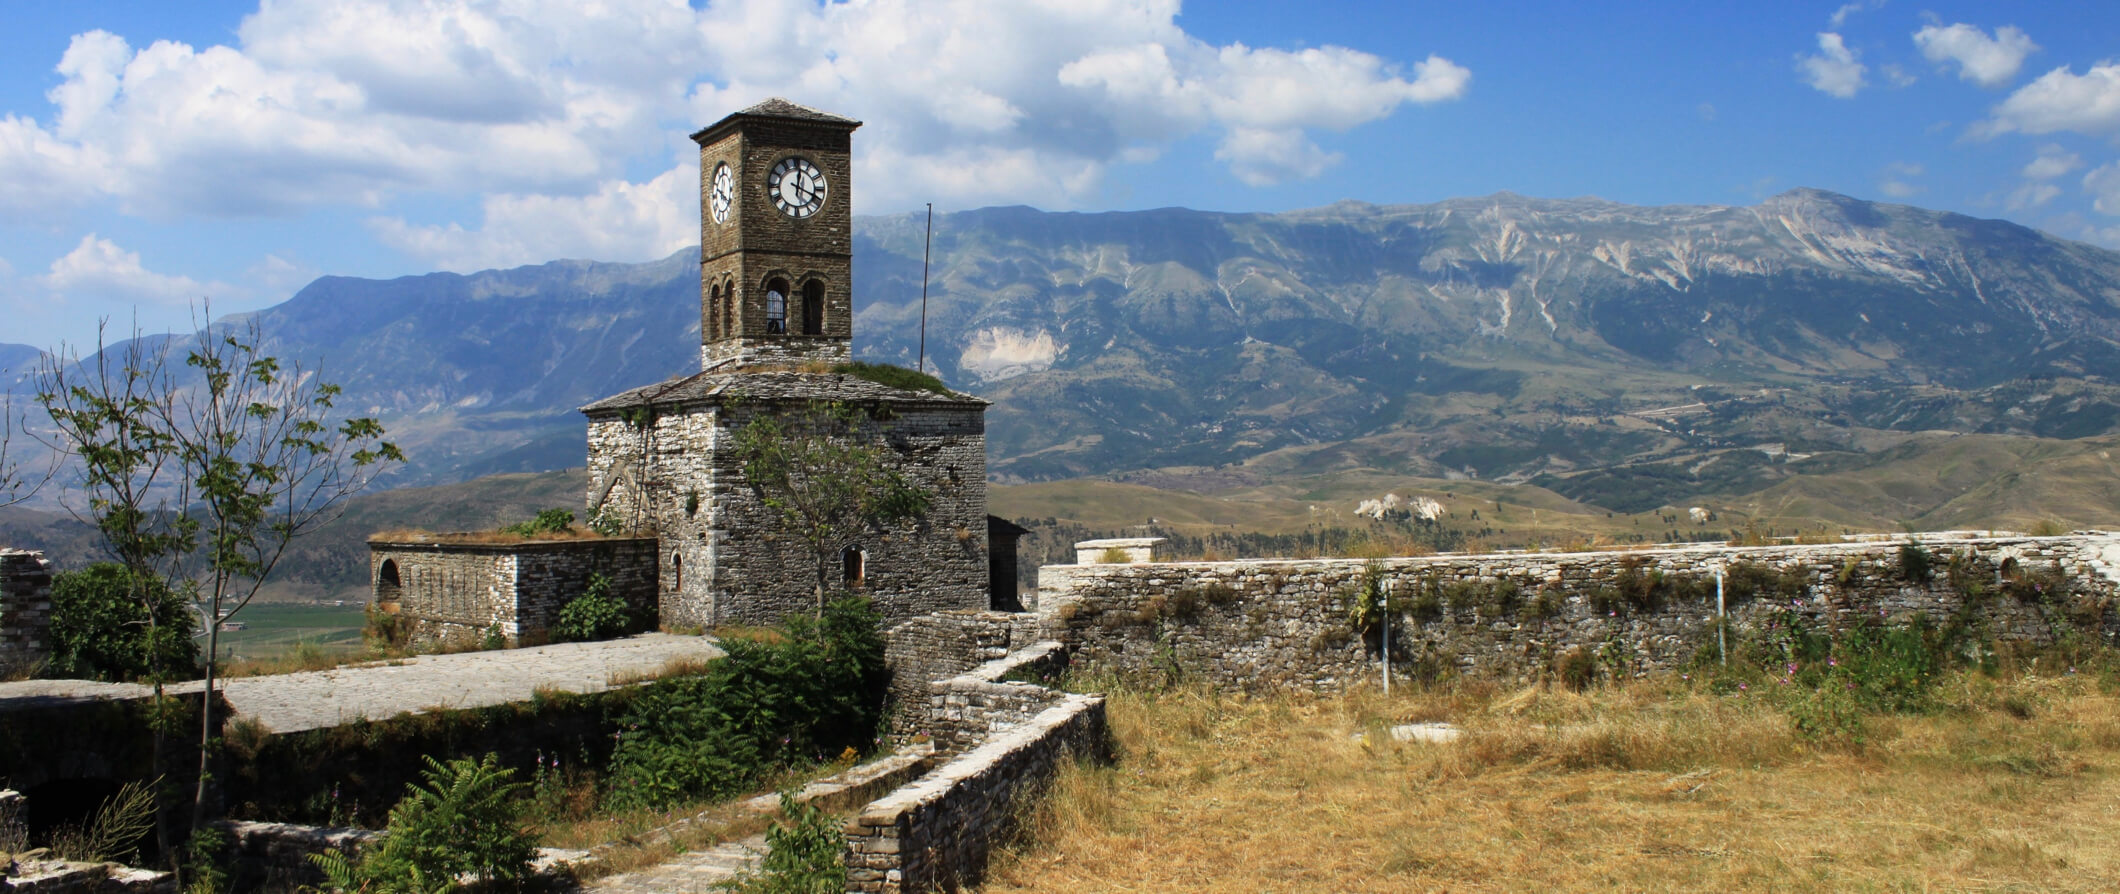 Albania in April: Travel Tips, Weather & More